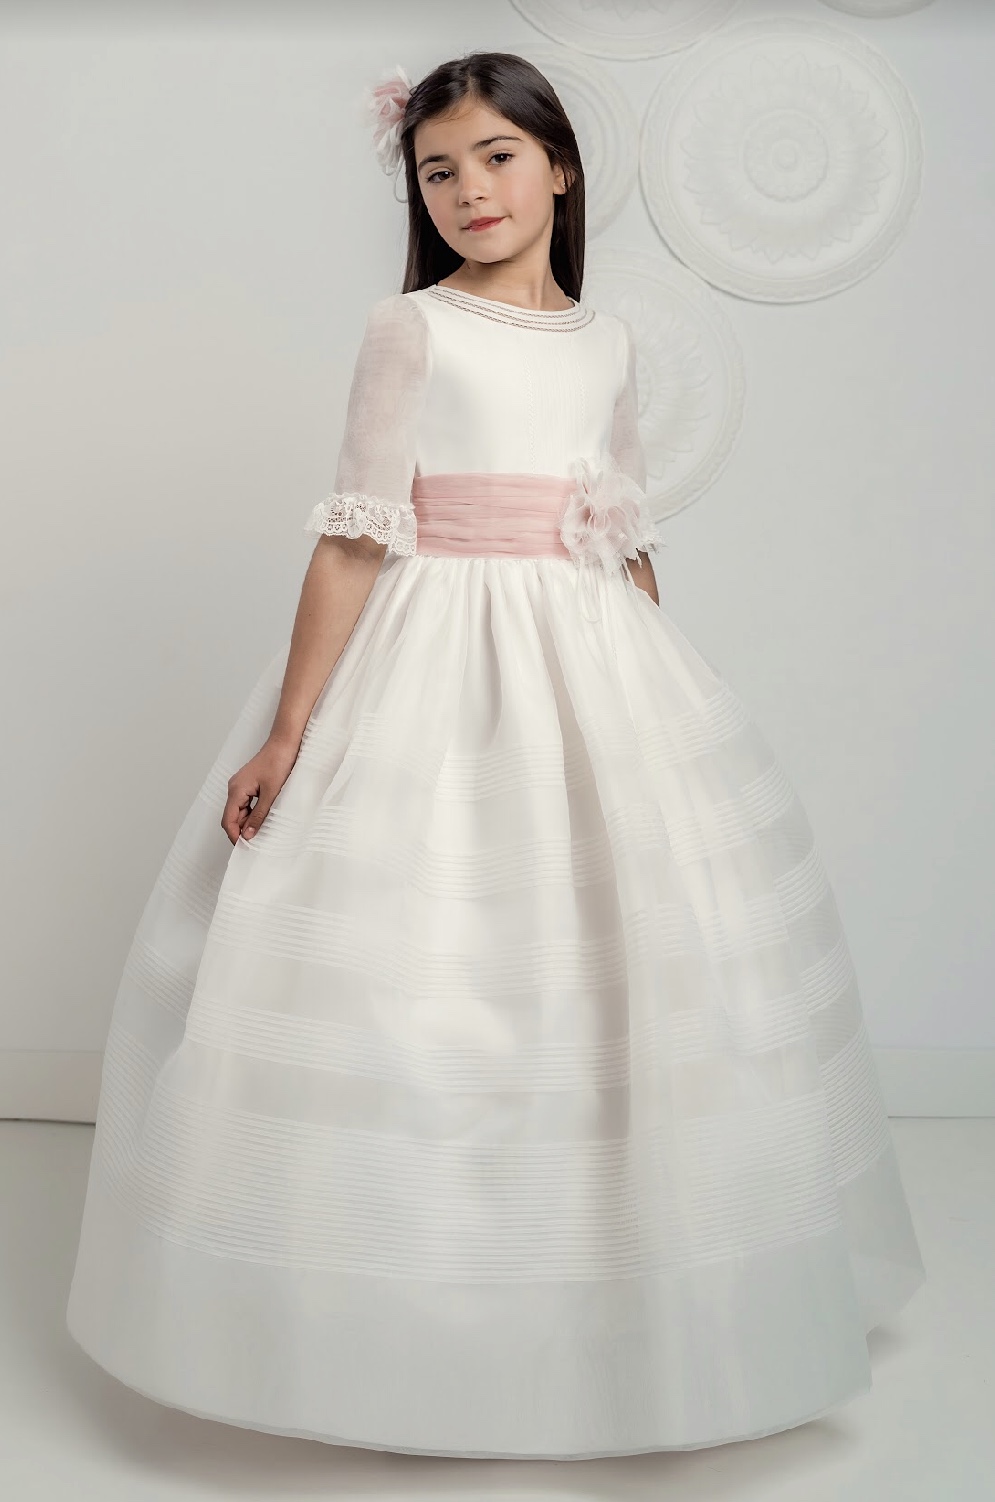 White Organza Communion Dress with delicate tucks and 3/4 sleeves